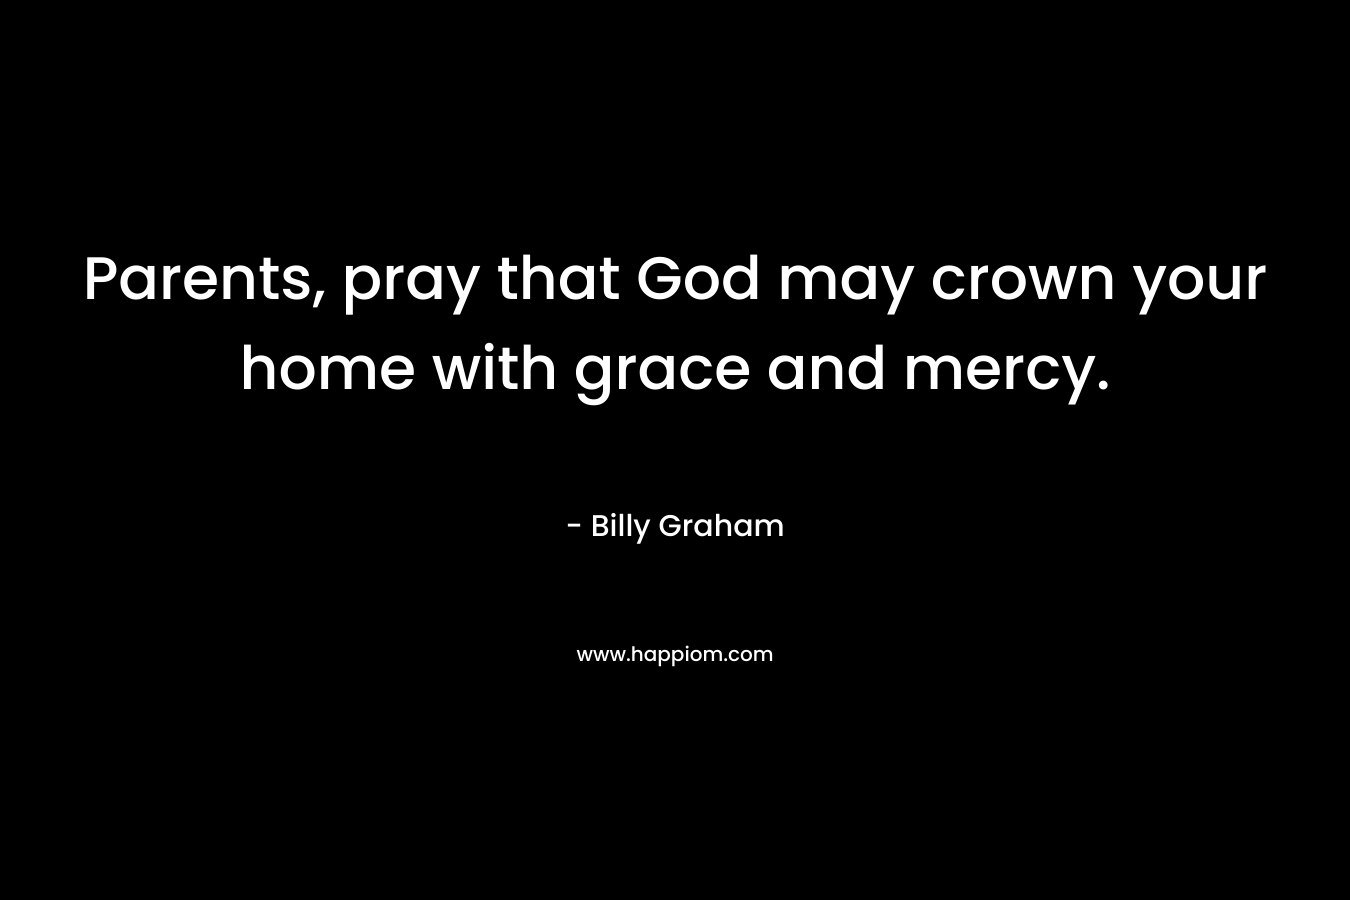 Parents, pray that God may crown your home with grace and mercy.